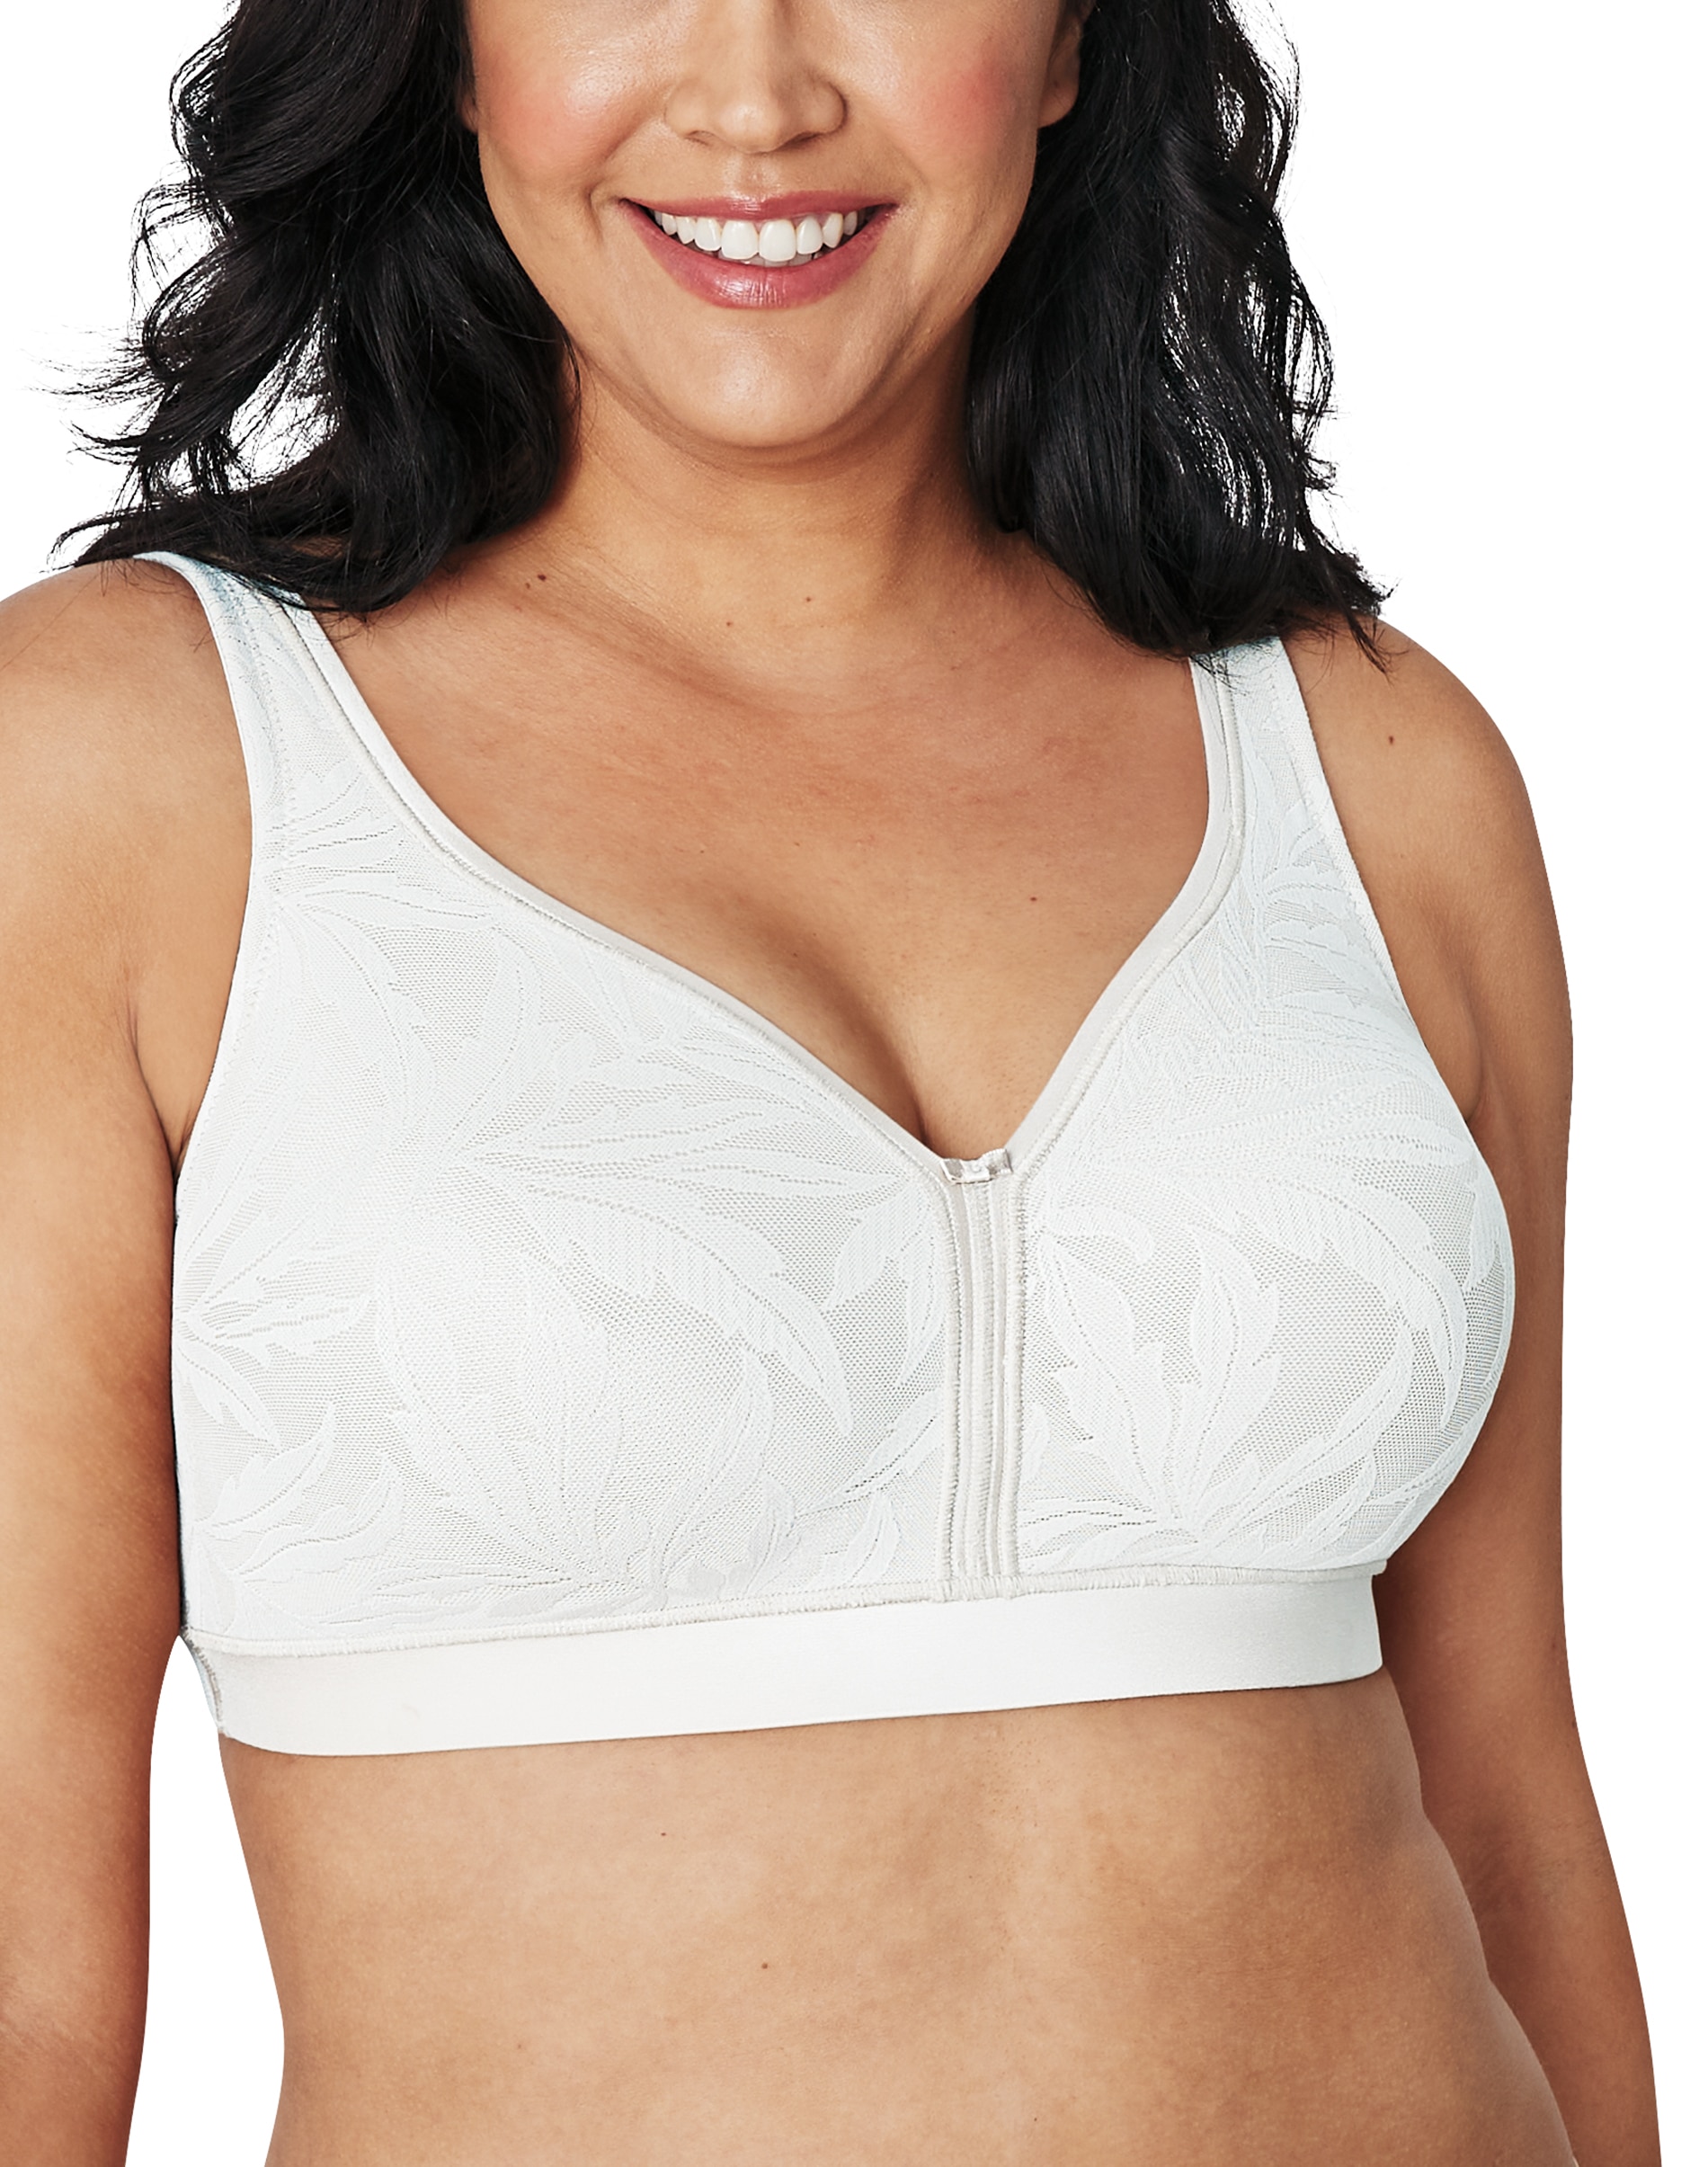 PLAYTEX 18 Hour bra 4159 40B excaliber wireless active breathable comfort  NEW